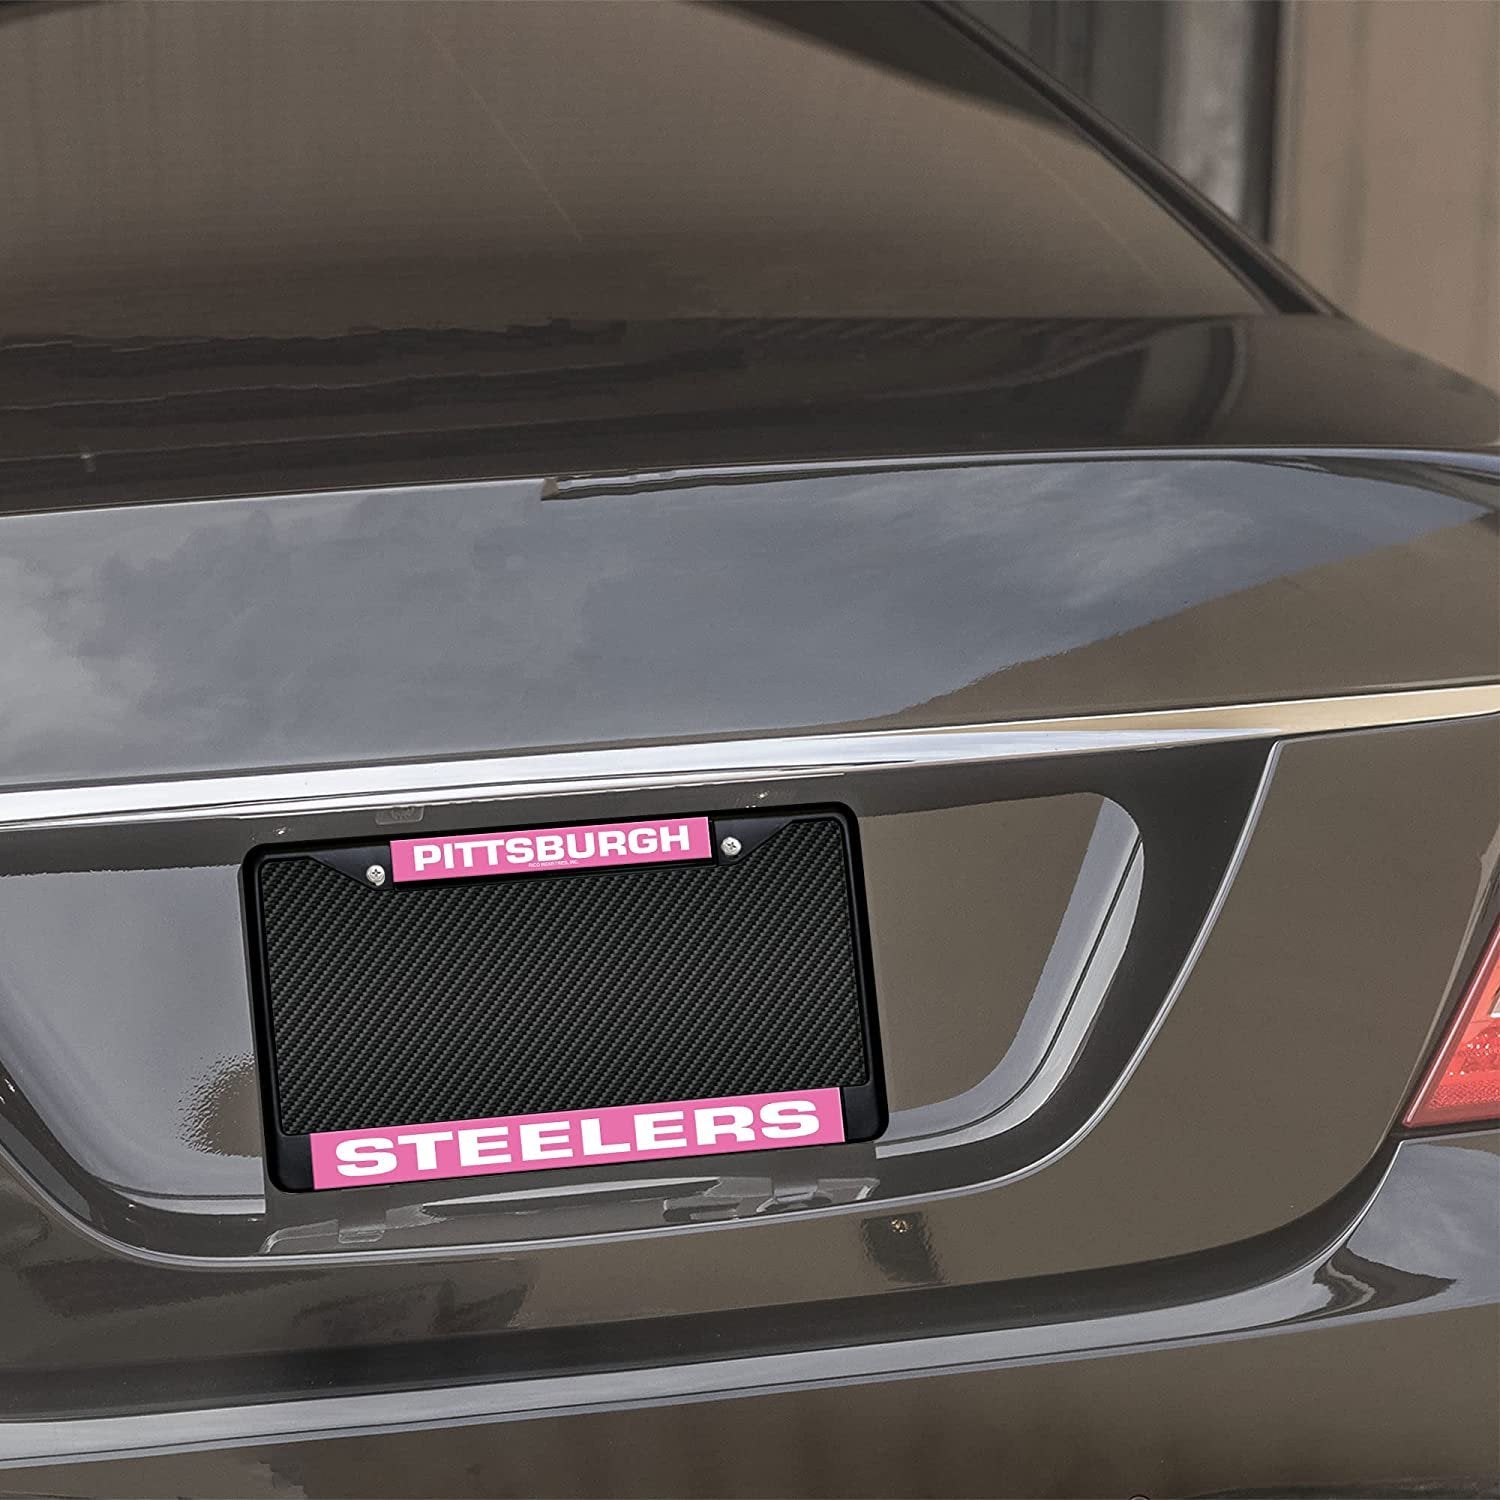 Pittsburgh Steelers Black Metal License Plate Frame Chrome Tag Cover Pink Inserts 6x12 Inch